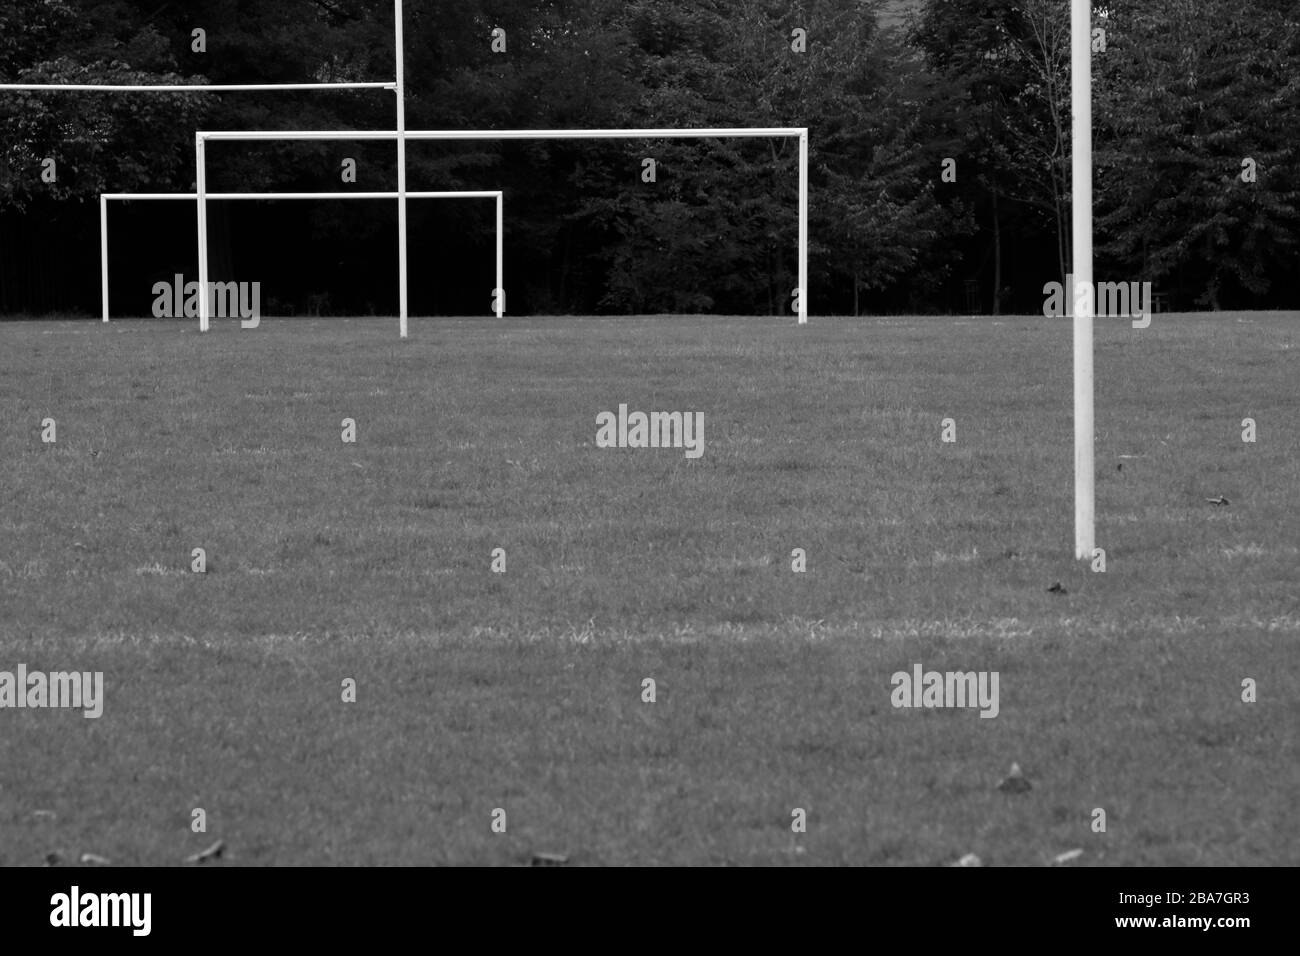 Football and rugby posts in Hurlingham Park, Fulham, London, UK Stock Photo